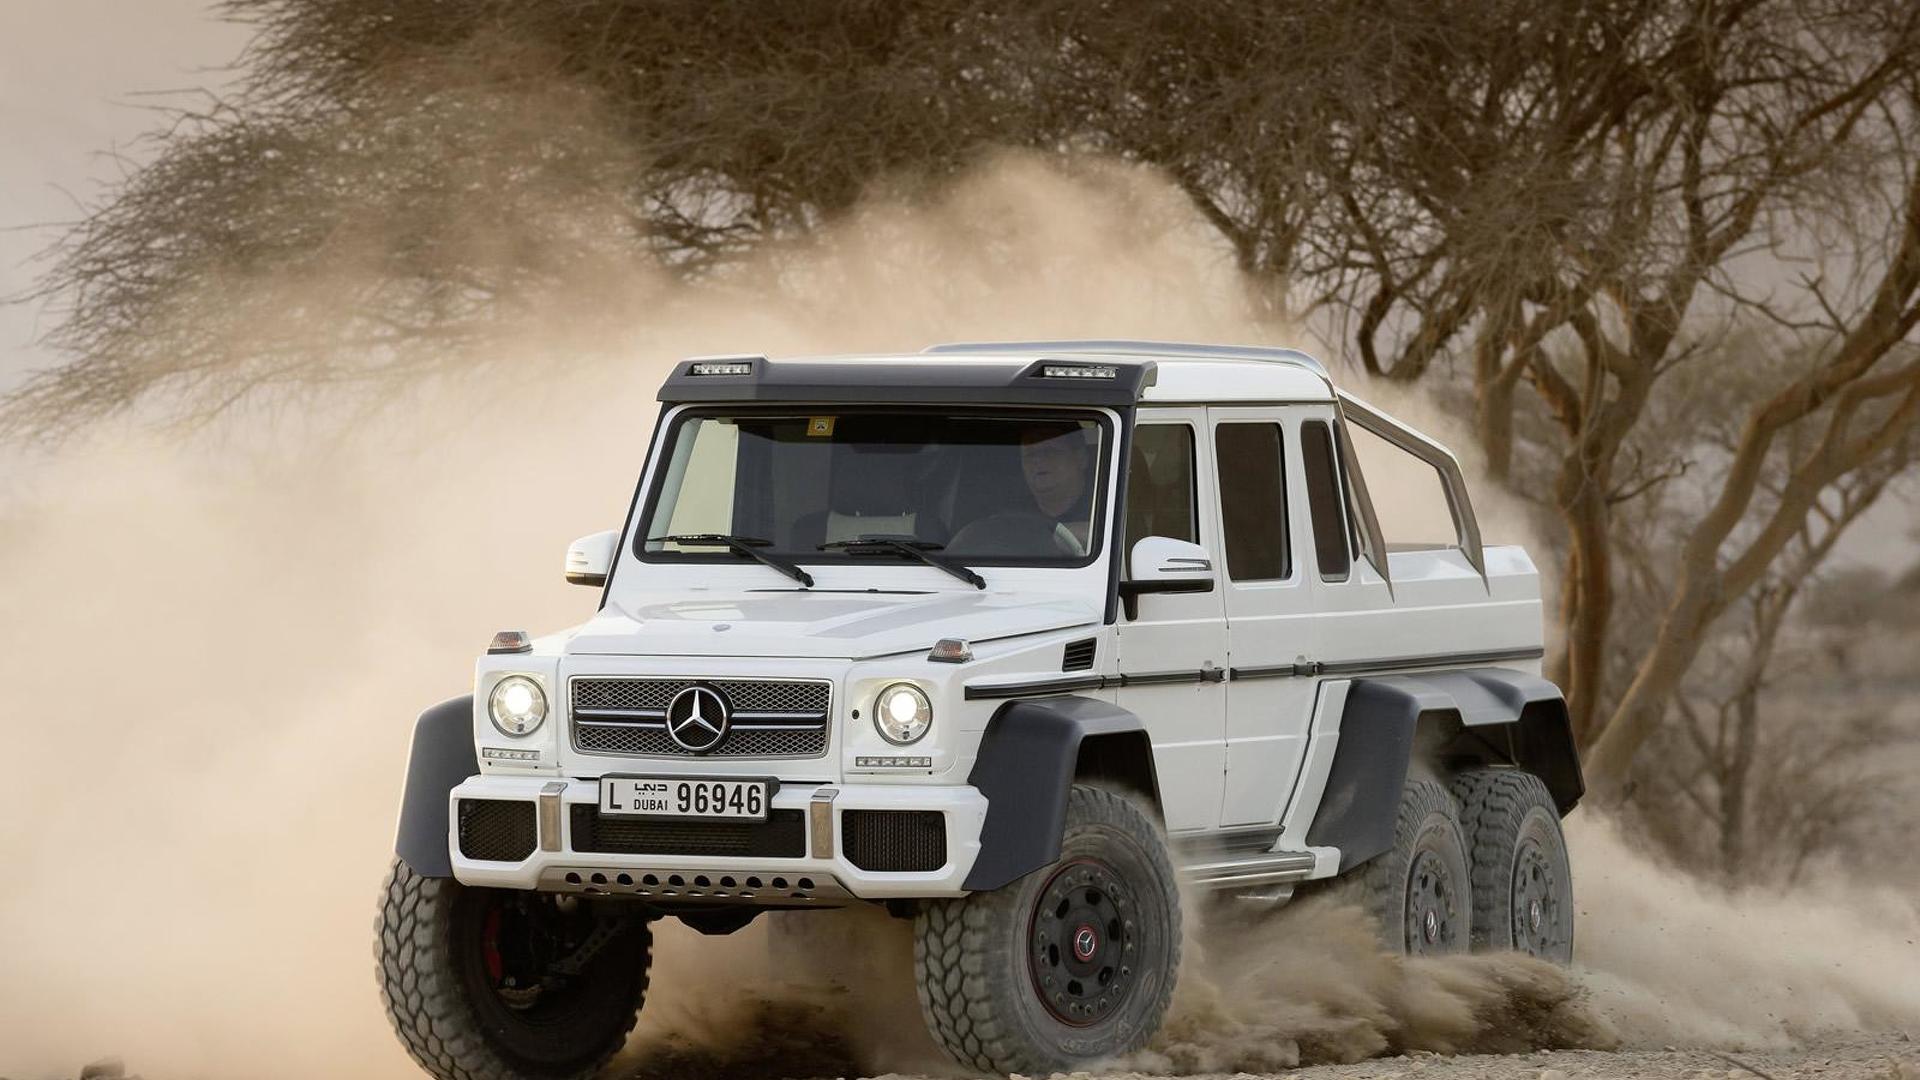 Texas Armoring offers an armored Mercedes G63 AMG 6x costs $1.3